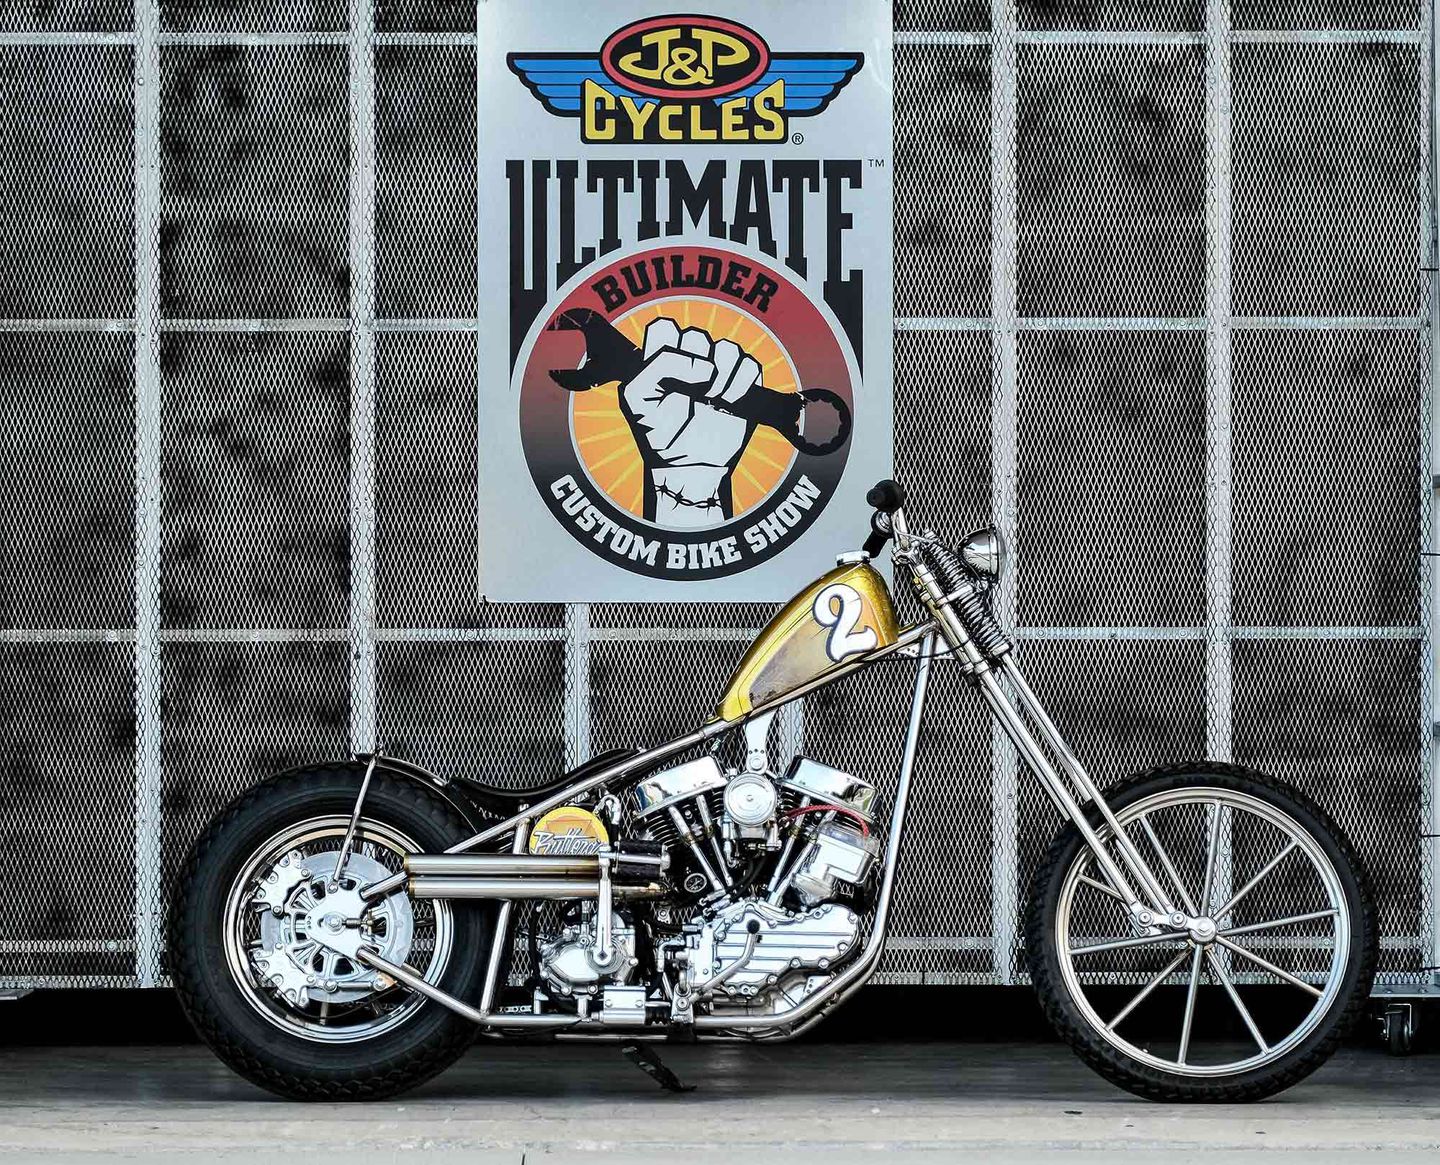 A view of a custom motorcycle created in commemoration of the Ultimate Builders Custom Bike Show